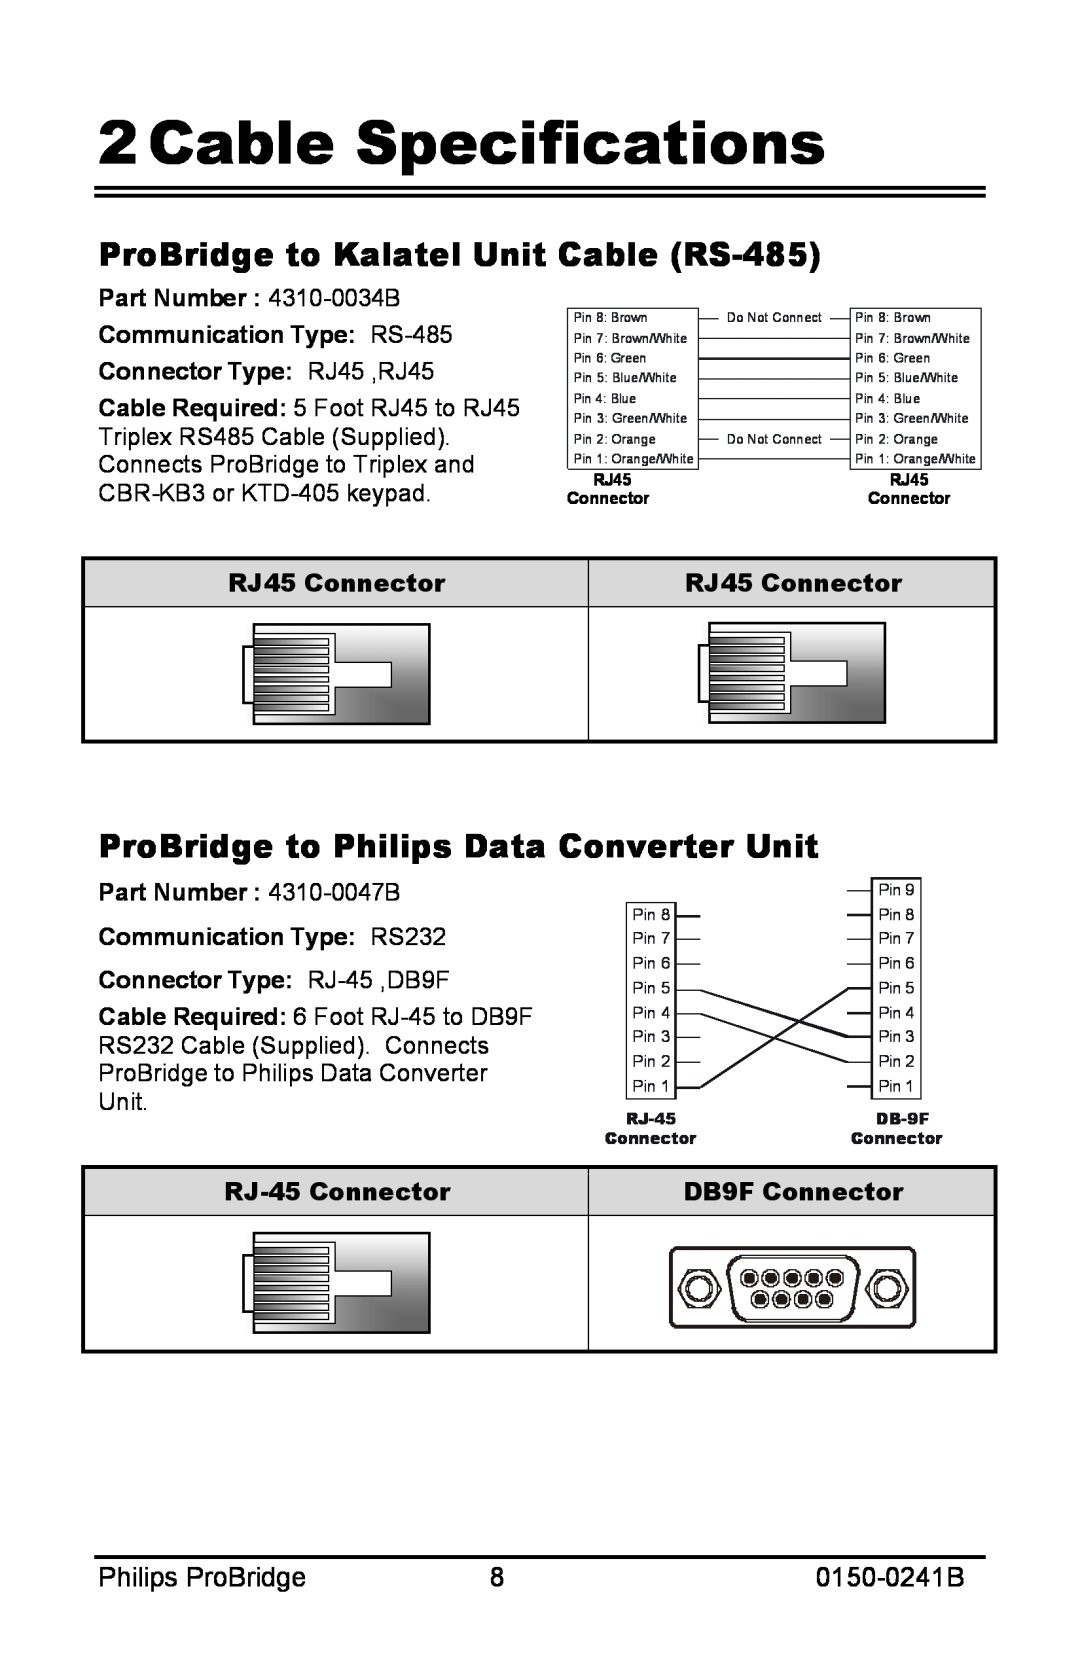 Philips 0150-0241B Cable Specifications, ProBridge to Kalatel Unit Cable RS-485, ProBridge to Philips Data Converter Unit 